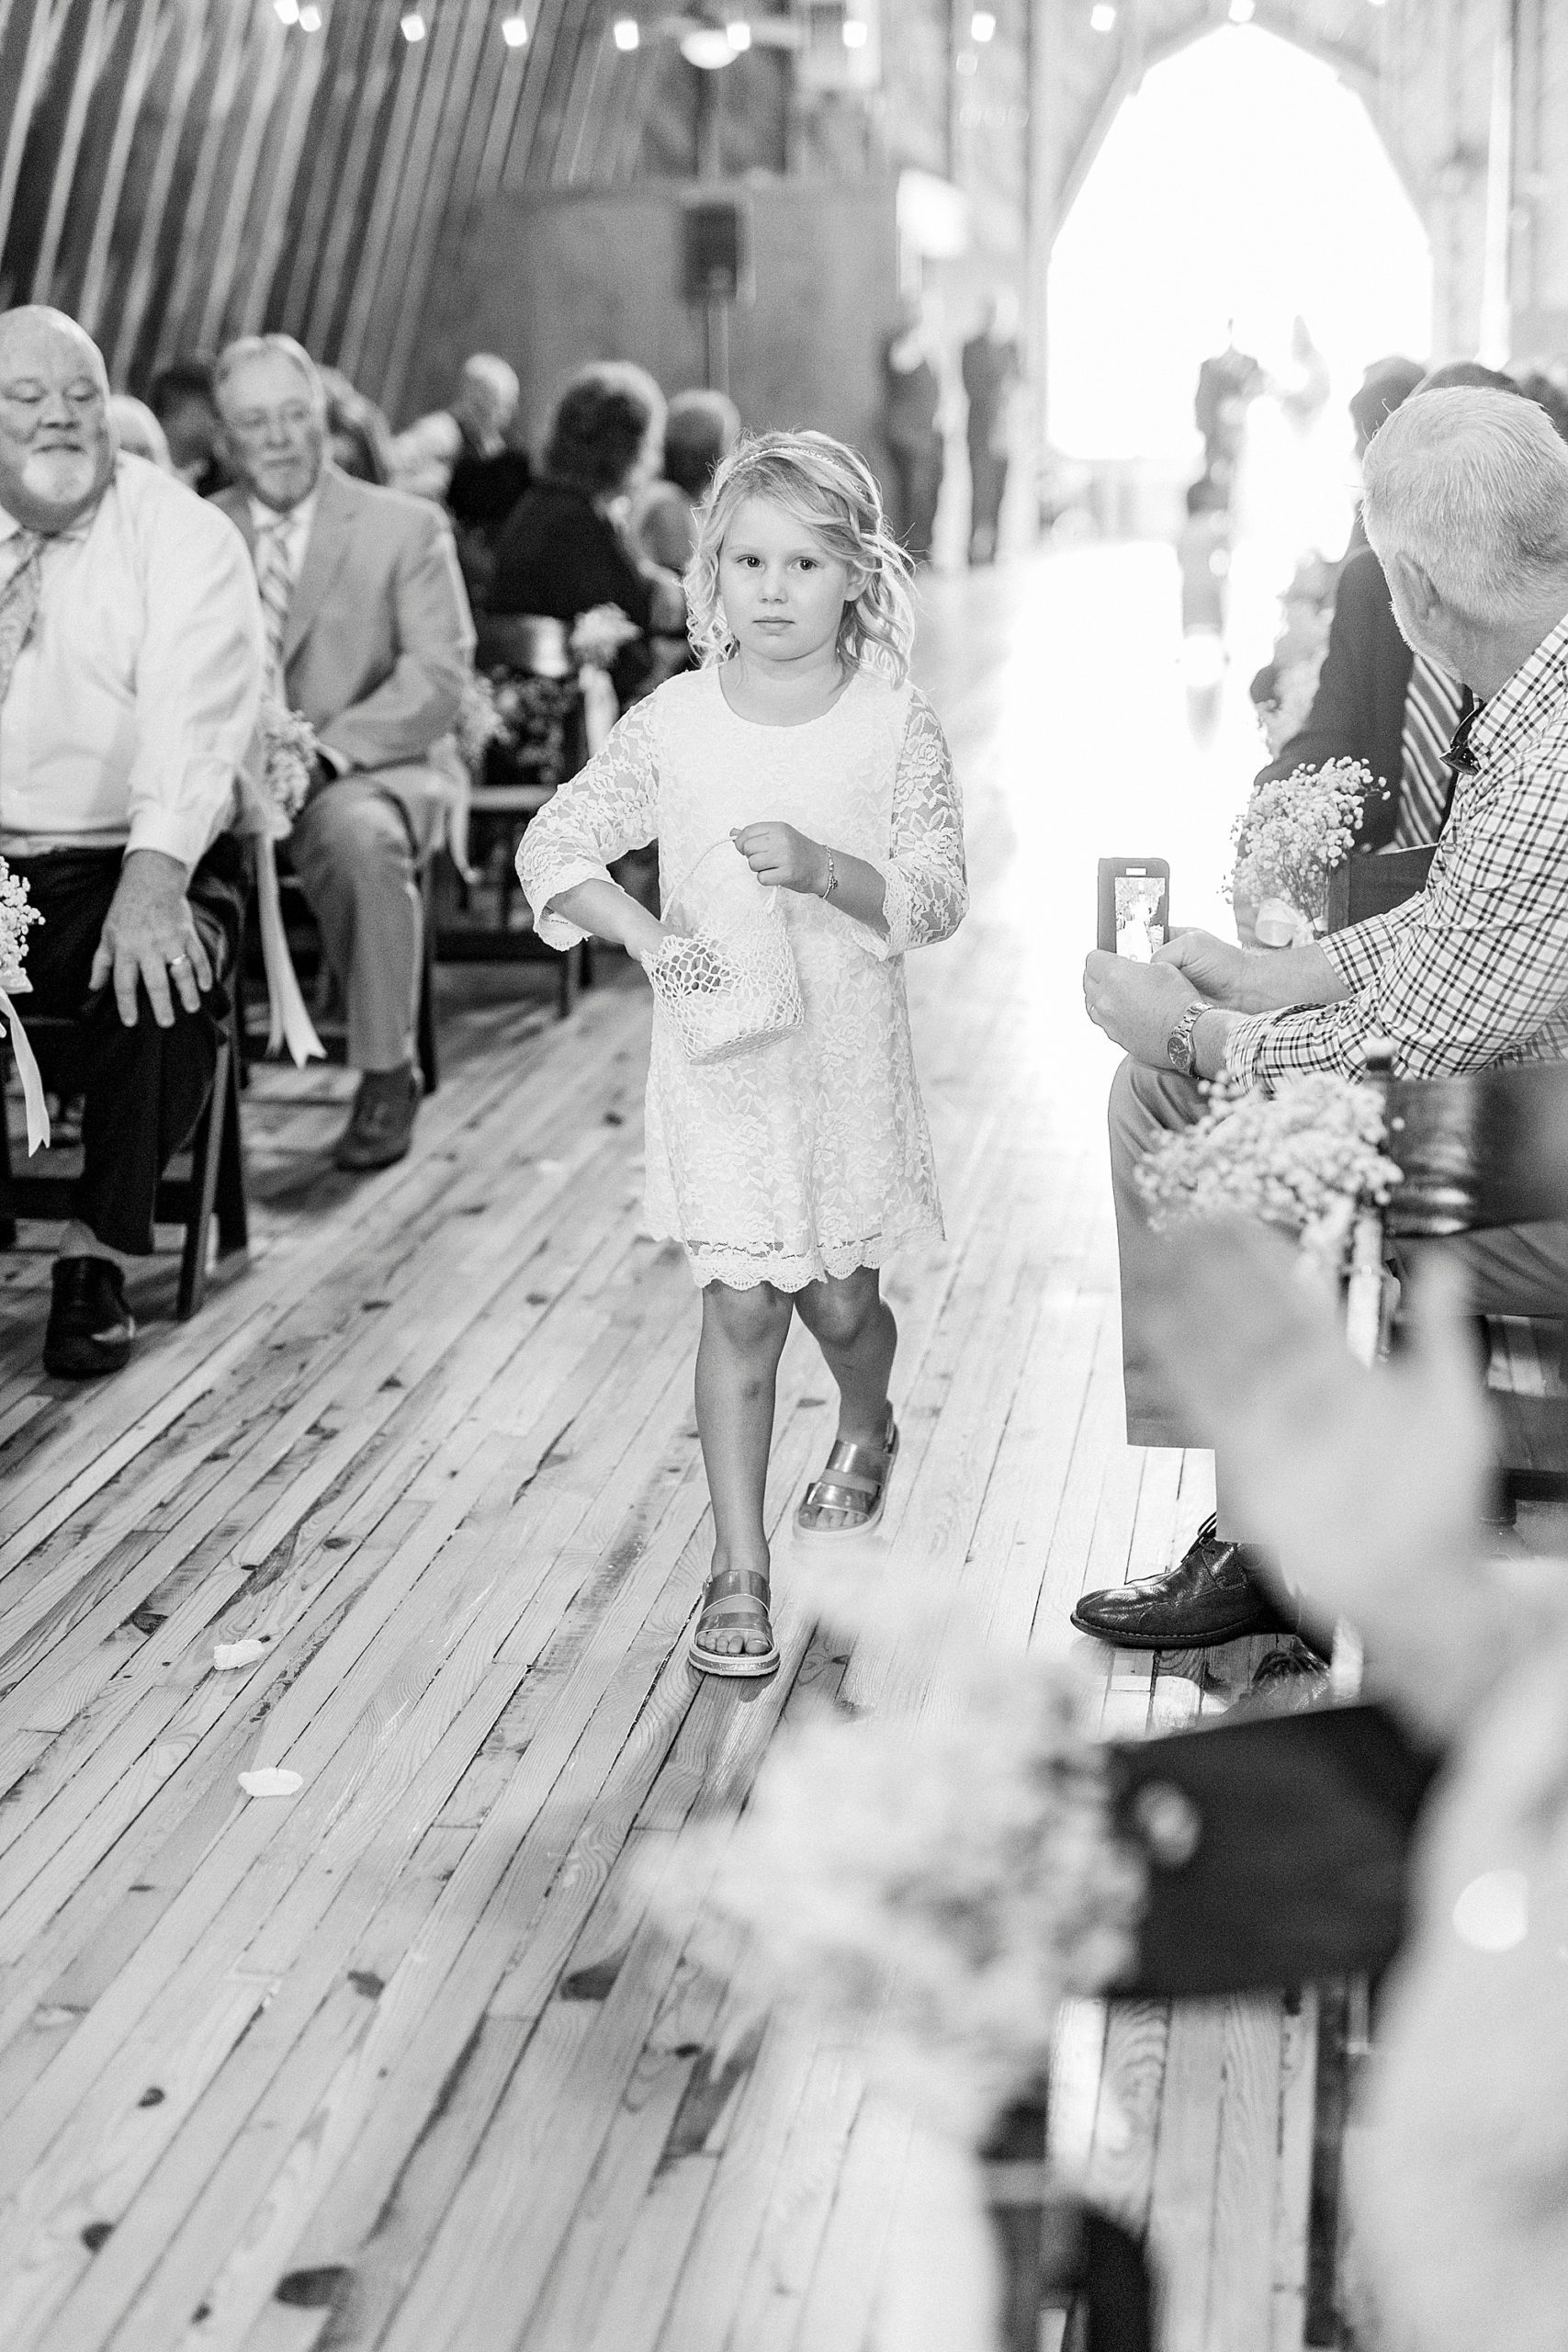 flower girl throws petals during wedding ceremony